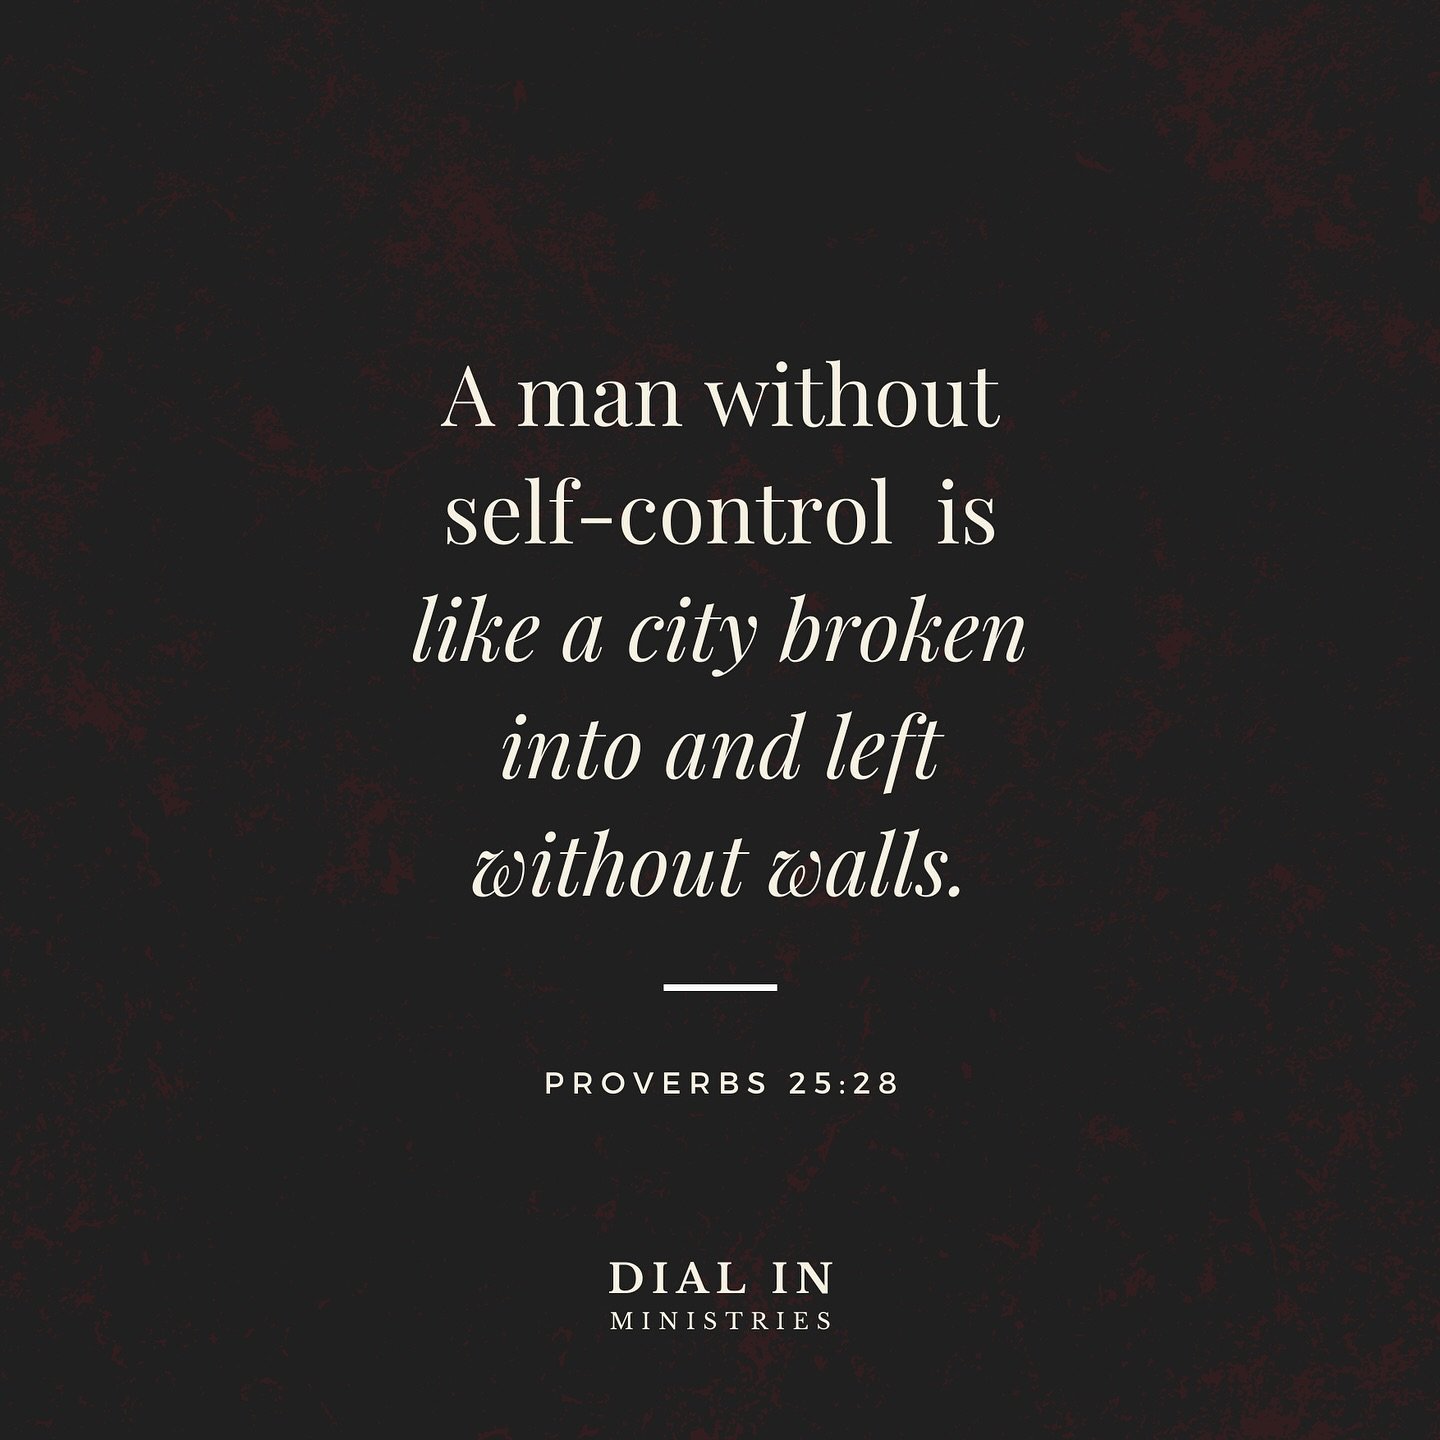 &ldquo;A man without self-control is like a city broken into and left without walls.&rdquo; ~ Proverbs 25:28